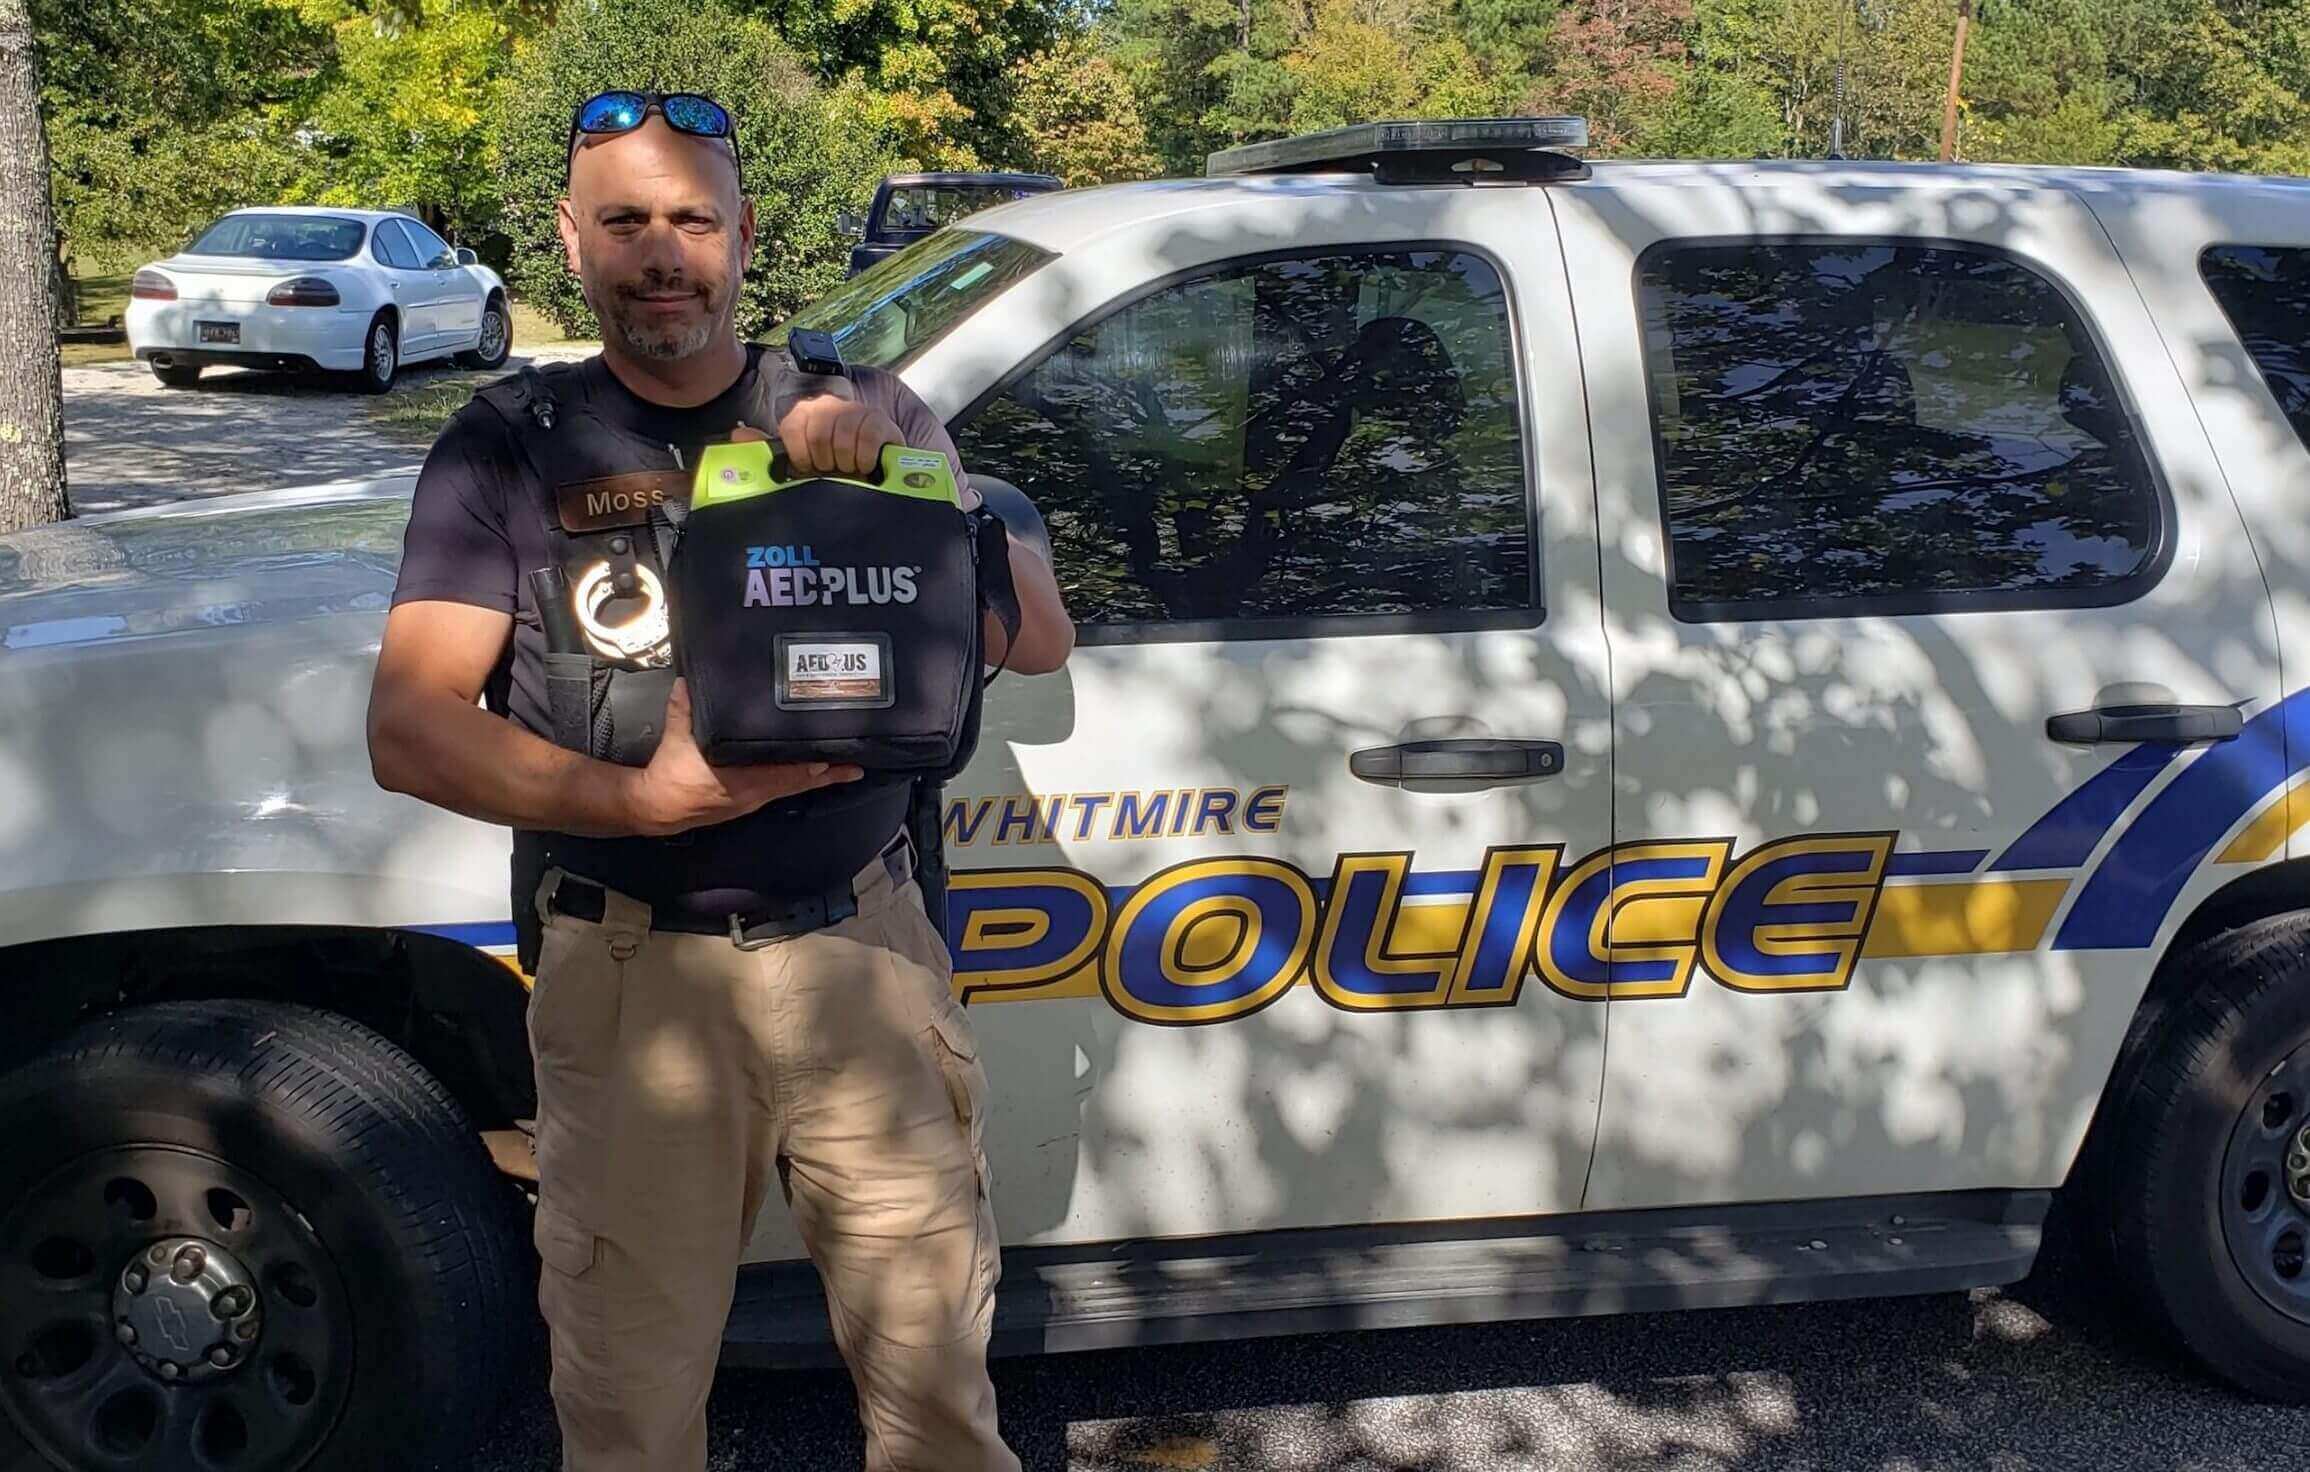 Jeremiah Sinclair of Whitmire Police Department, AED.us giveaway winners